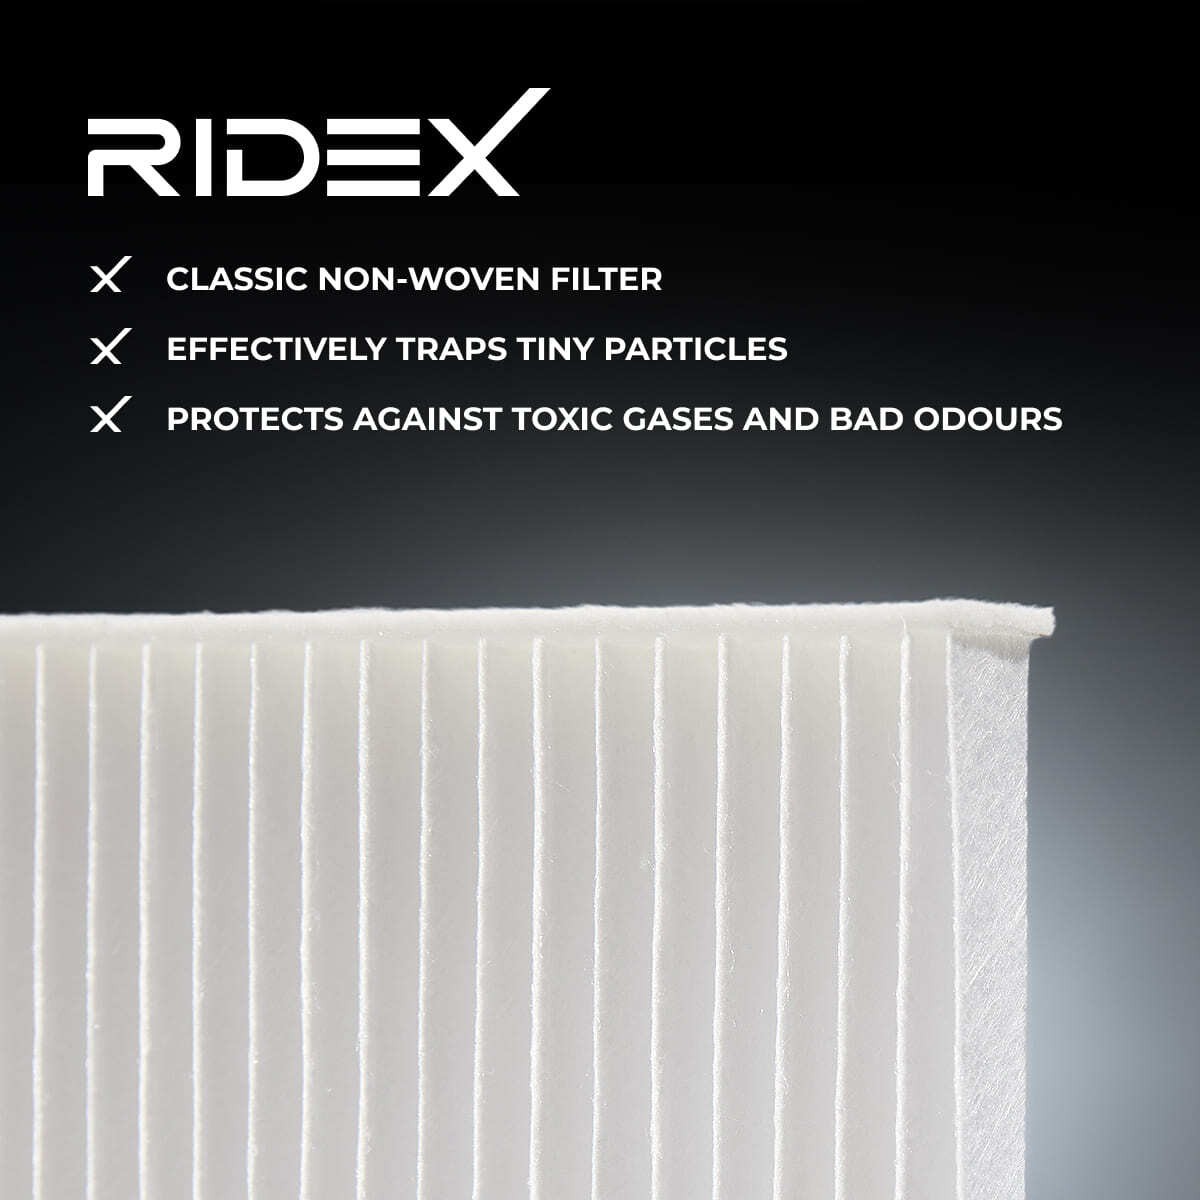 424I0116 Air con filter 424I0116 RIDEX Particulate Filter, 346 mm x 166 mm x 75 mm